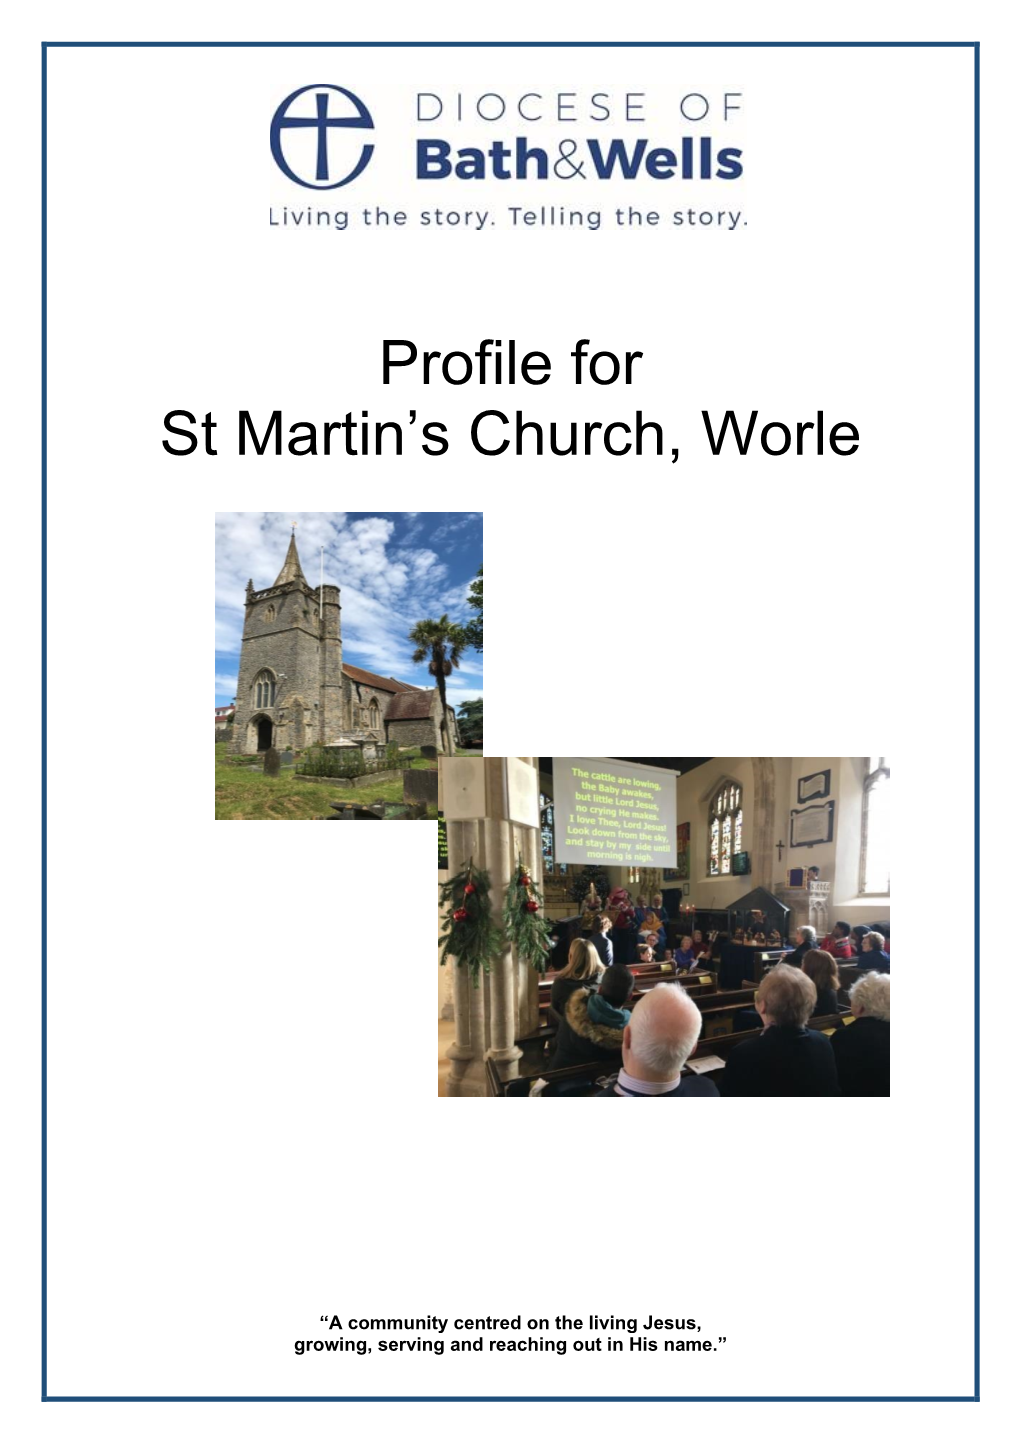 Profile for St Martin's Church, Worle